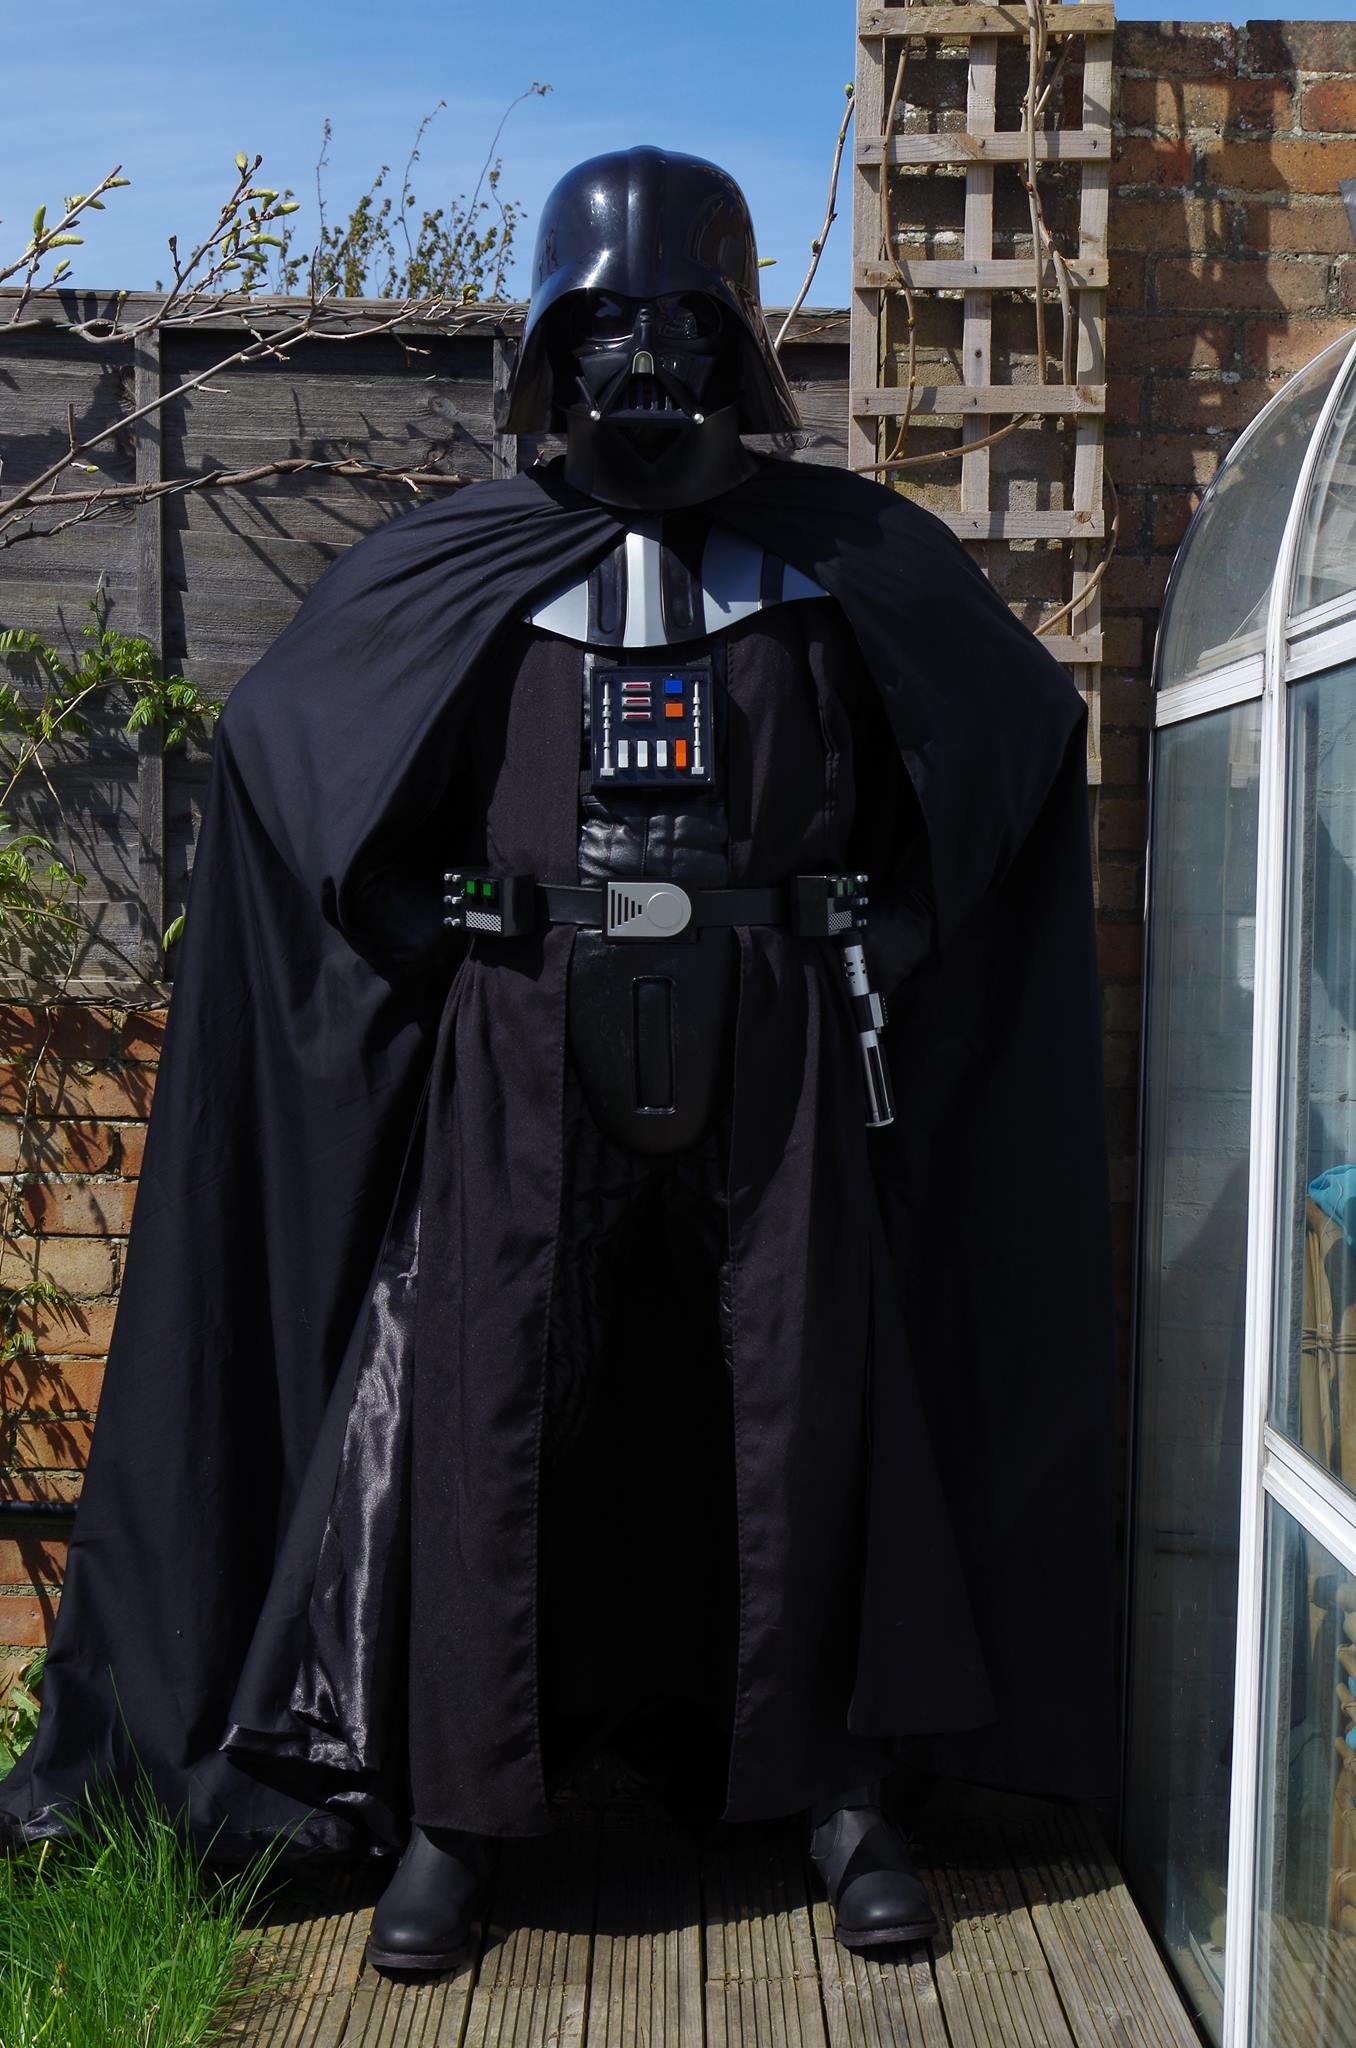 Darth Vader costume build by Lee